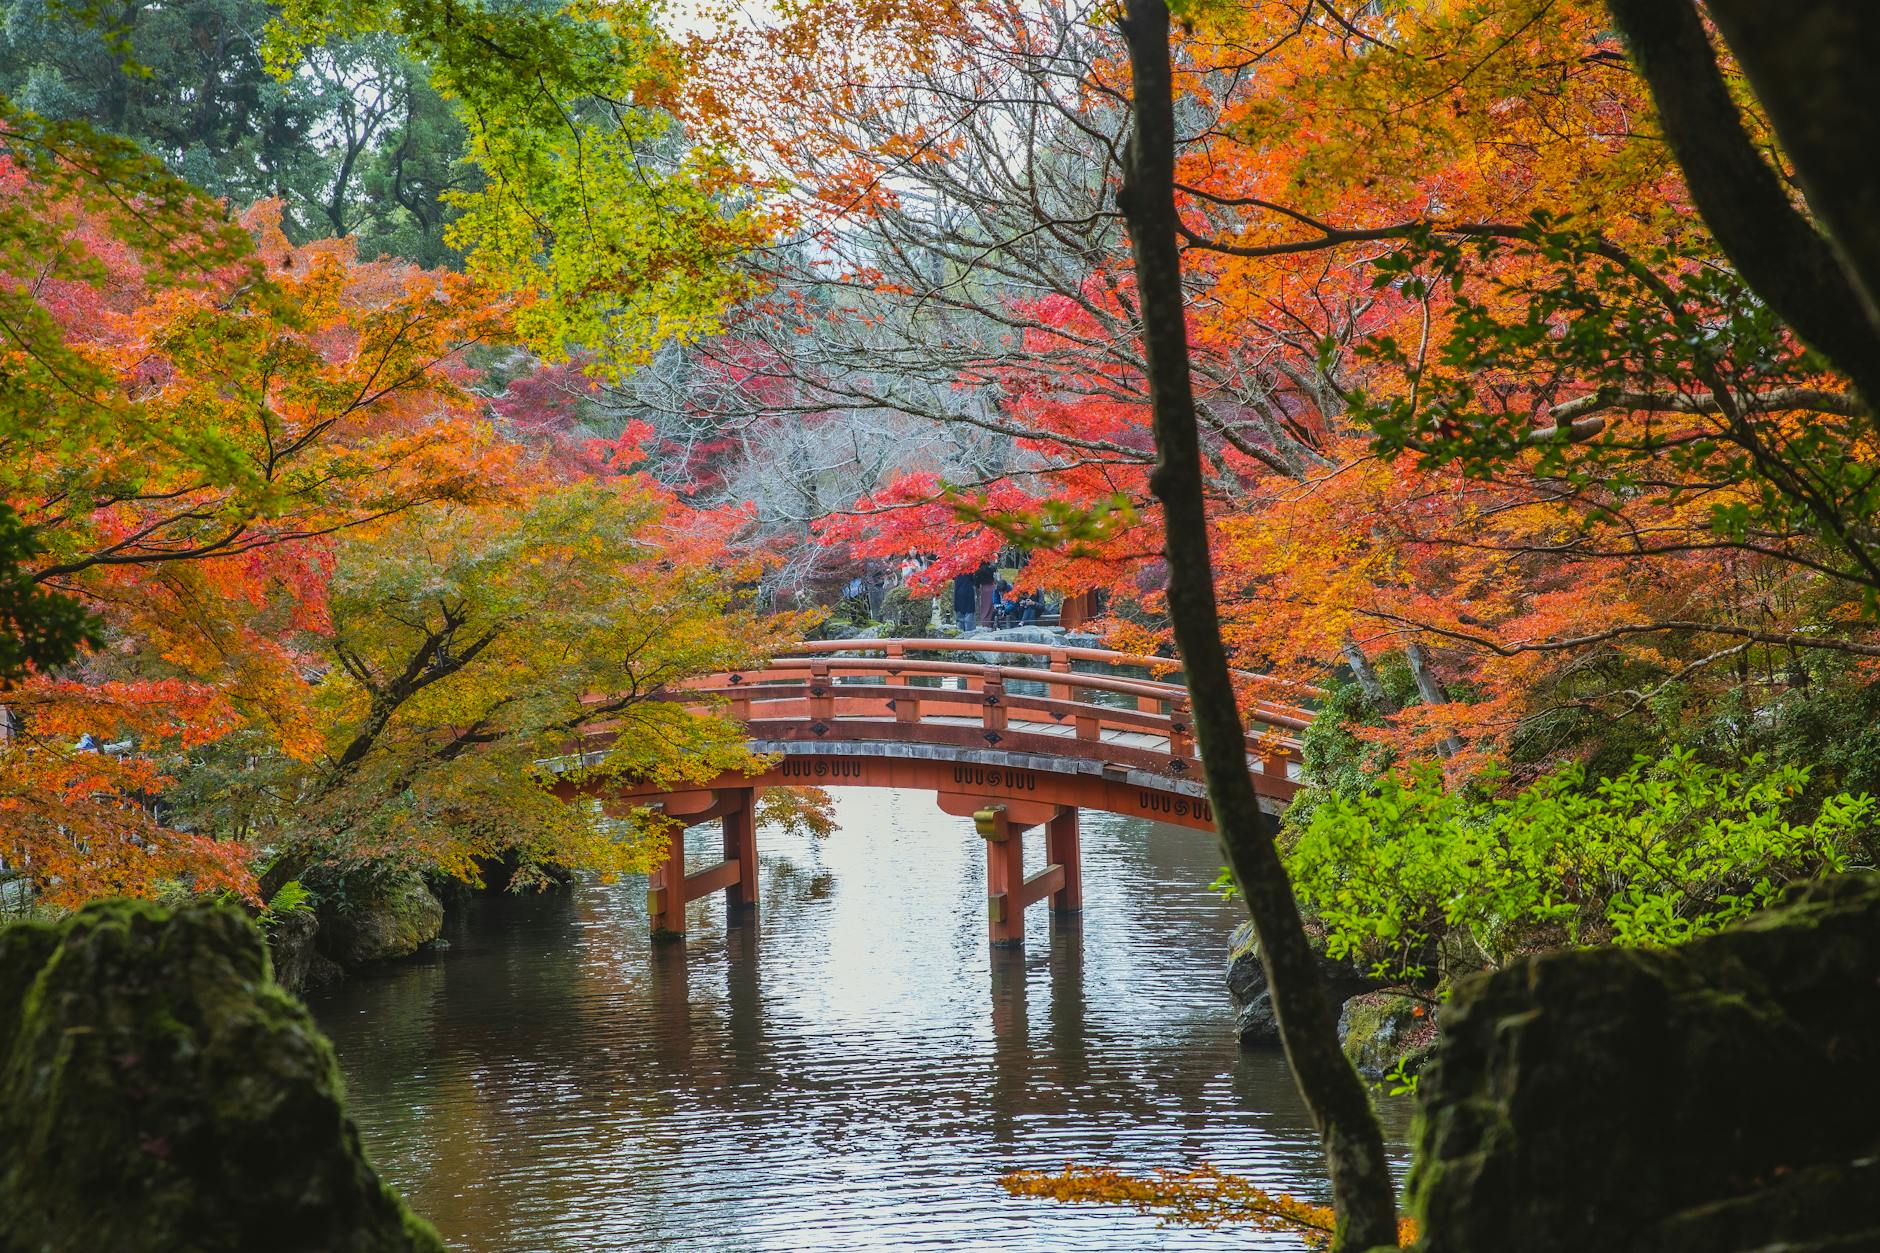 Arched bridge over calm lake in Japanese park